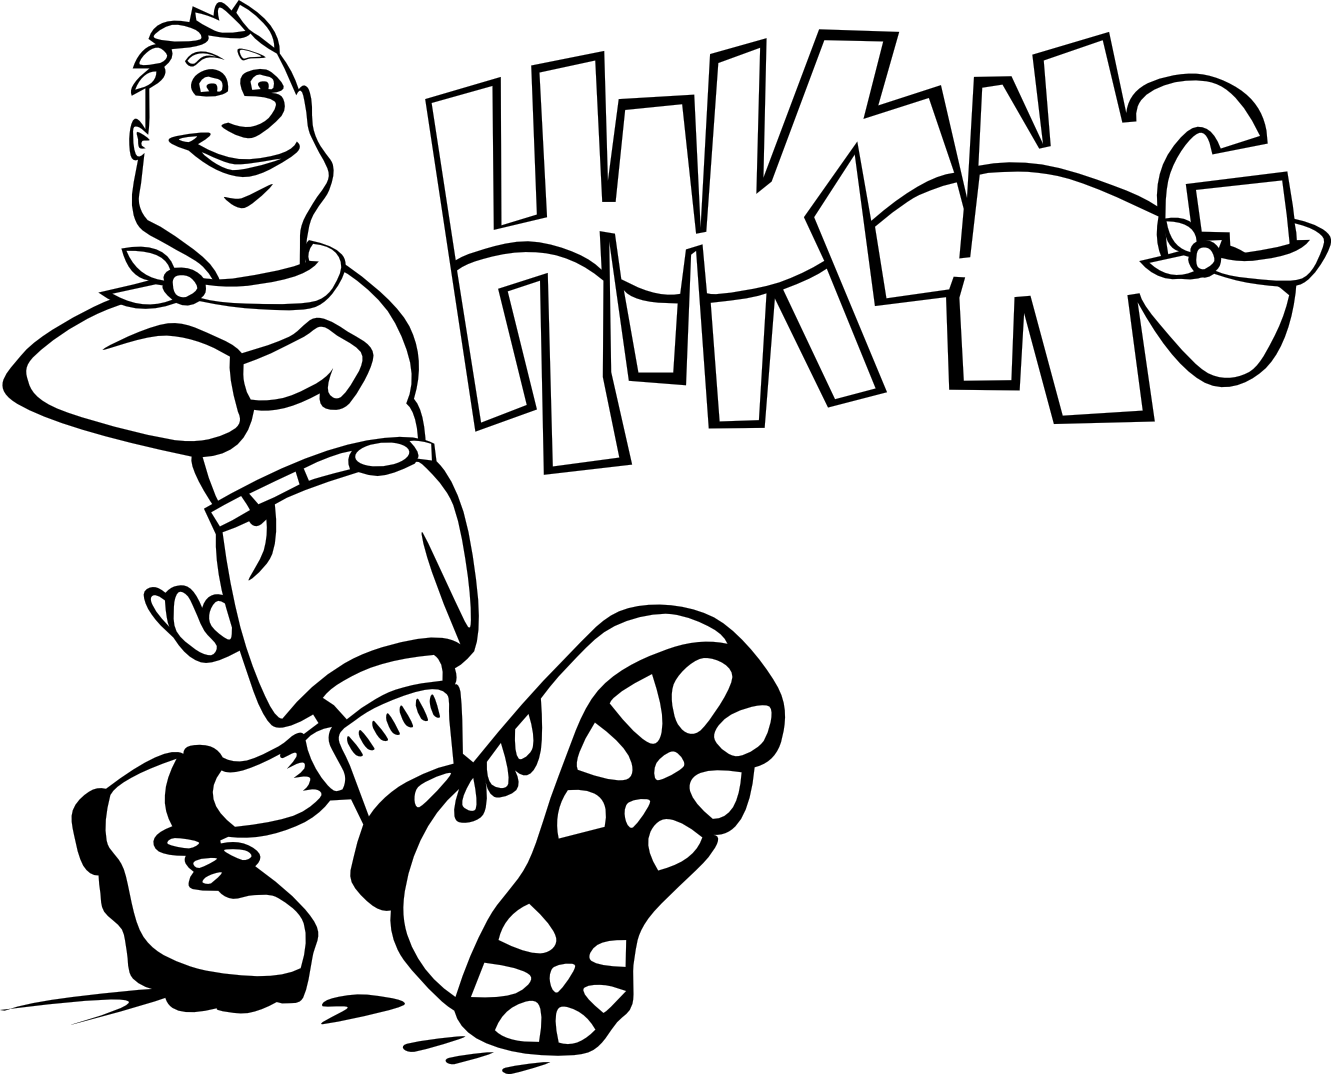 Hiking Clipart Black And White Hiking 1 Black White Line Art Coloring    